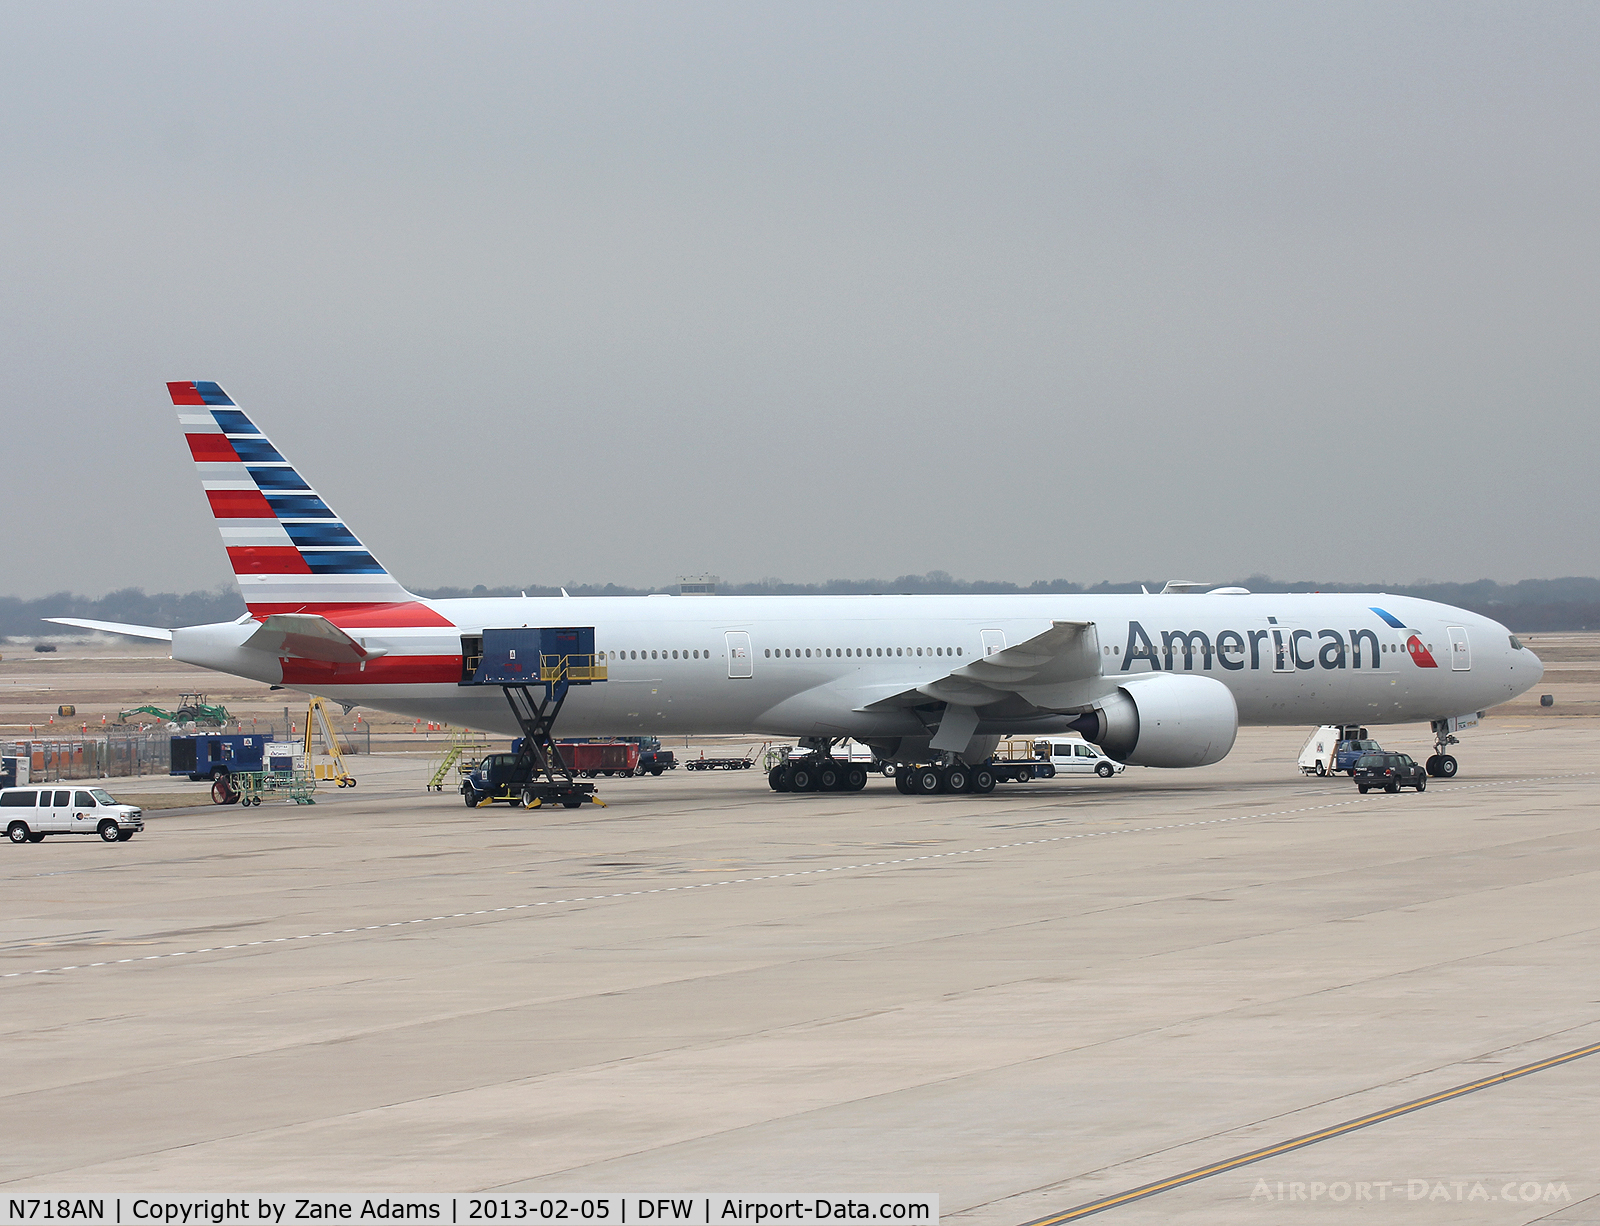 N718AN, 2012 Boeing 777-323/ER C/N 41665, American Airlines' new 777-300ER in their new livery at DFW Airport